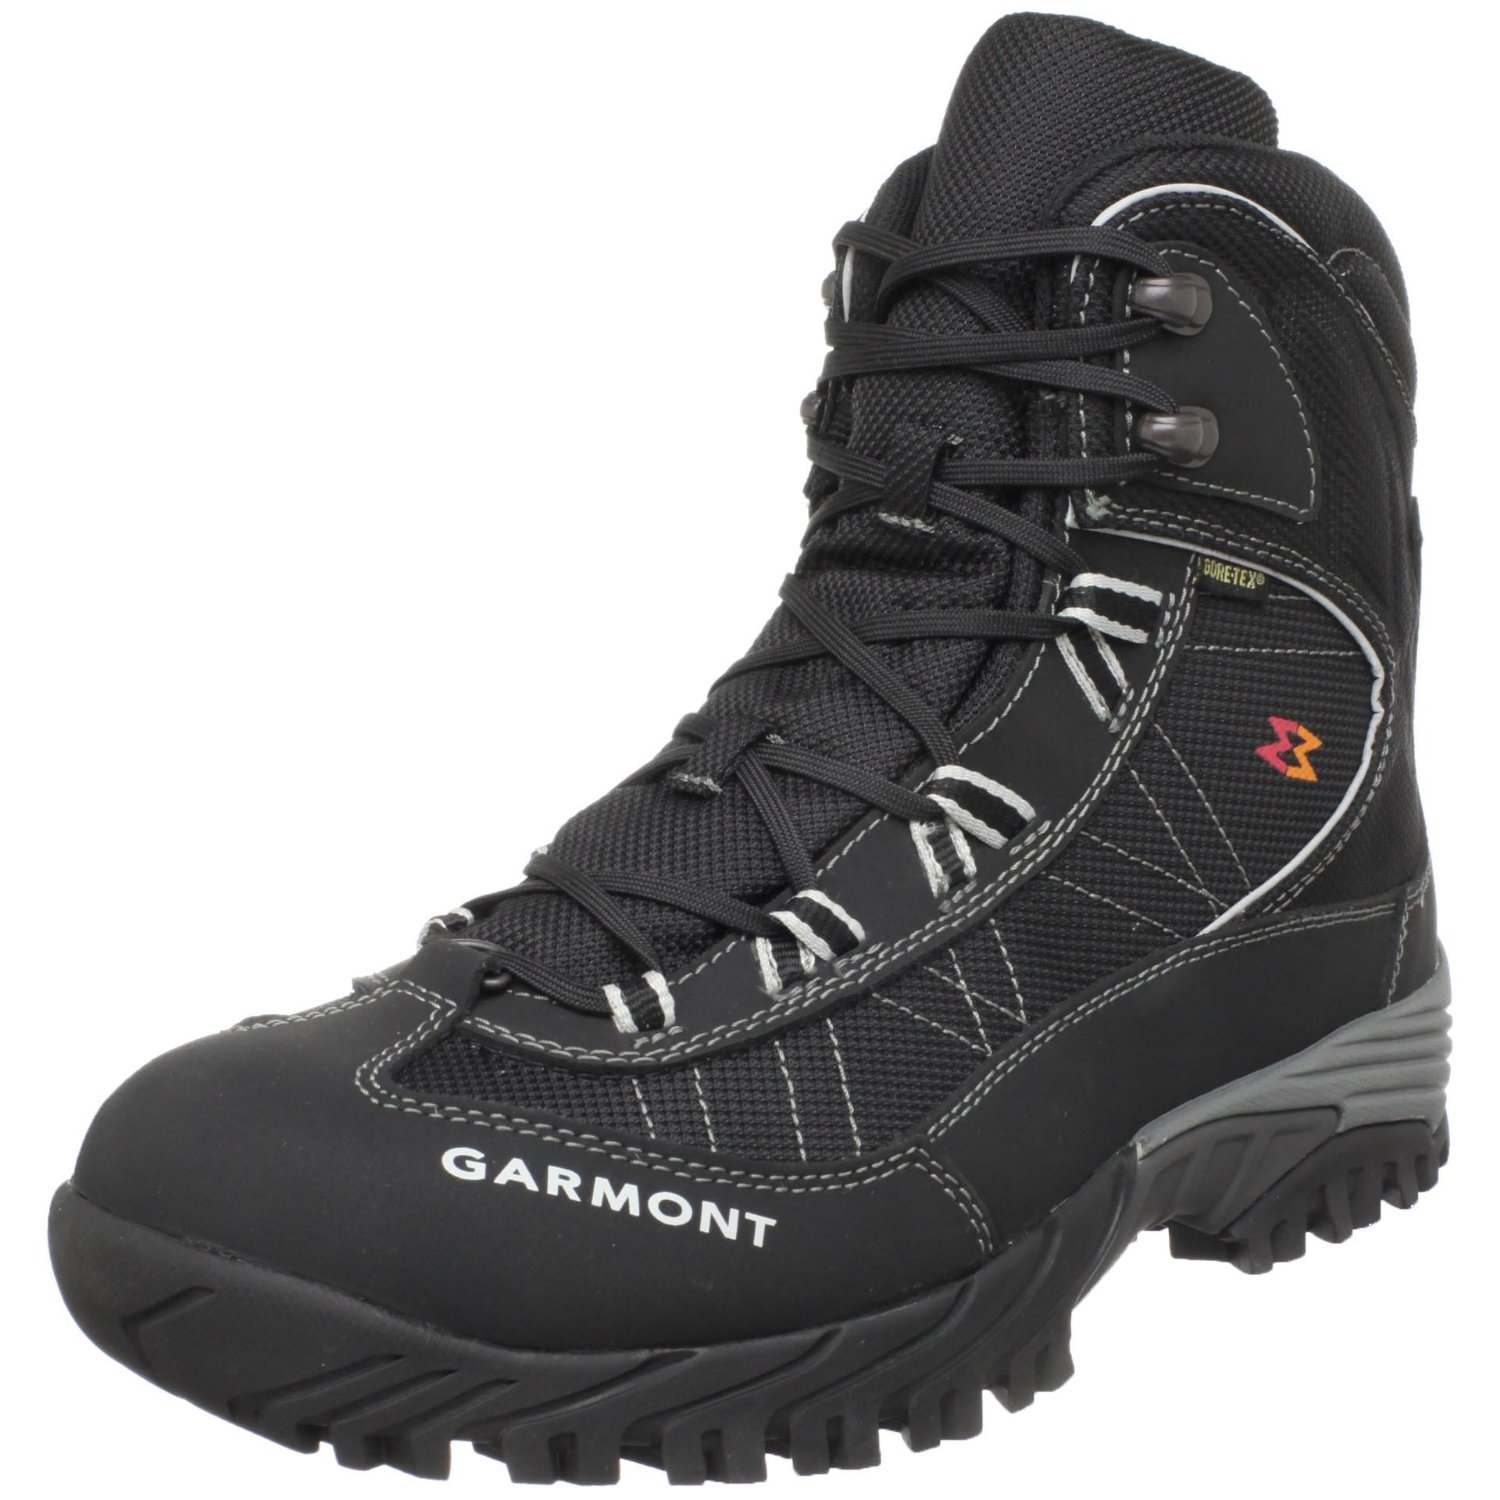 effect assemble Insulate Reviews & Ratings for Garmont Momentum Snow GTX Winter Boot